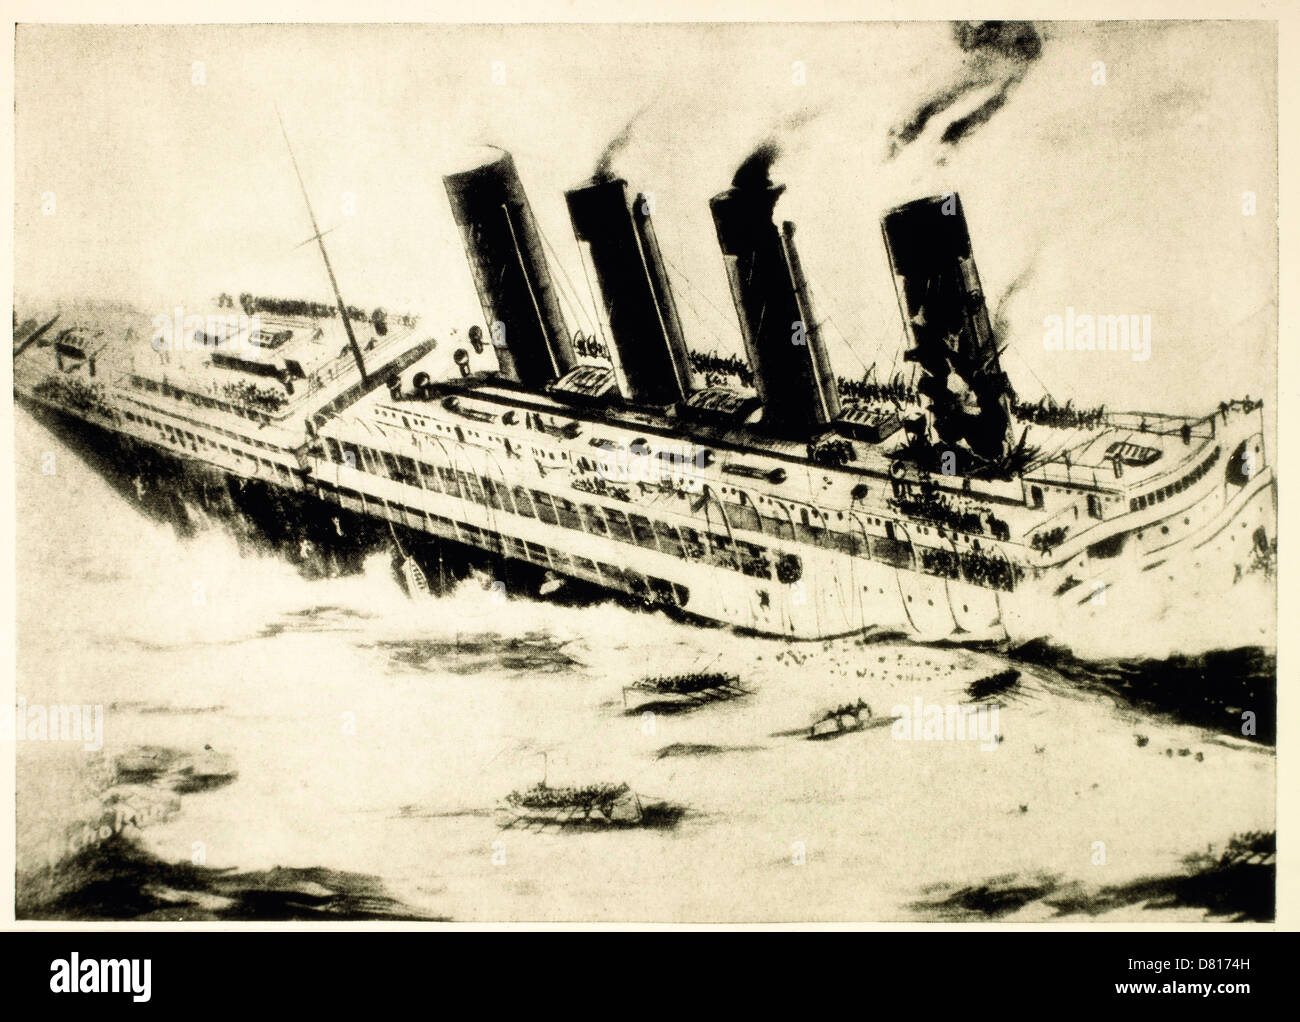 Lusitania Sinking off Irish Coast after being Torpedoed by German U-Boat During World War I, May 7, 1915 Stock Photo